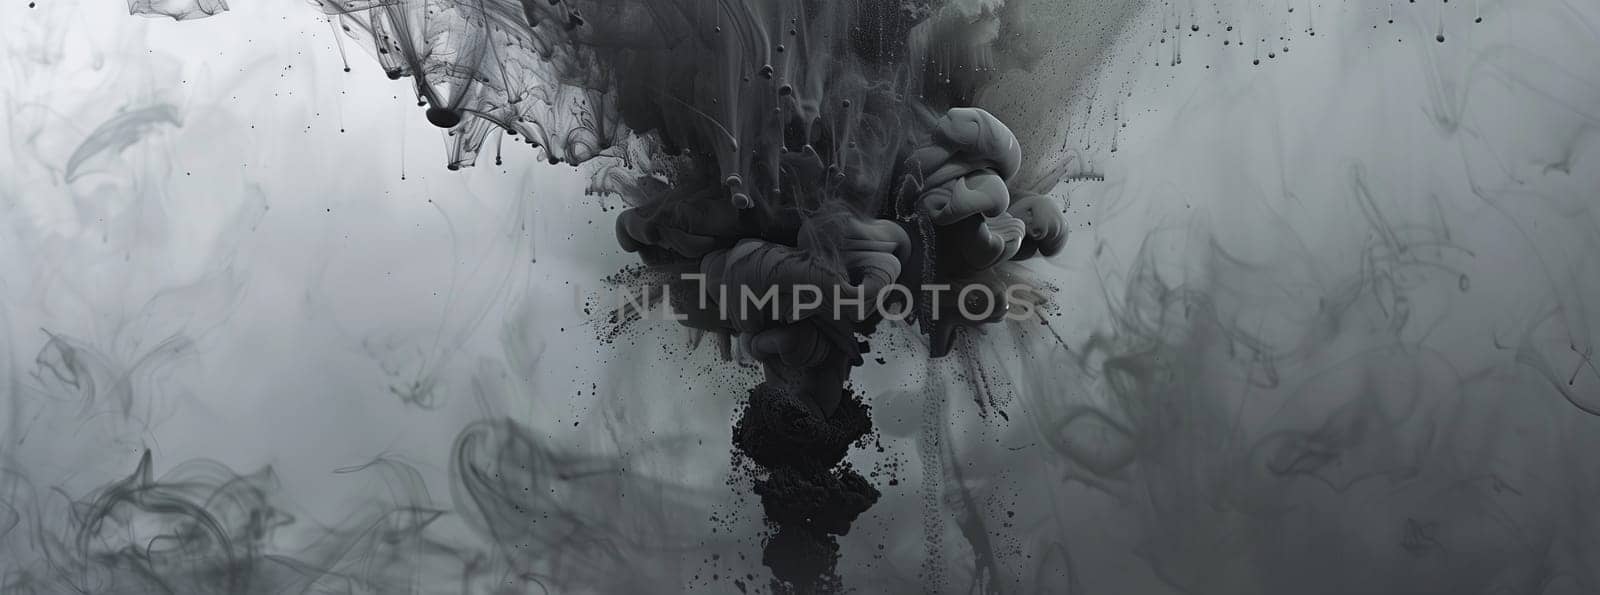 A dramatic closeup shot of dark black smoke billowing out of a pipe, resembling liquid darkness. This monochrome photography captures a striking event in an industrial plant